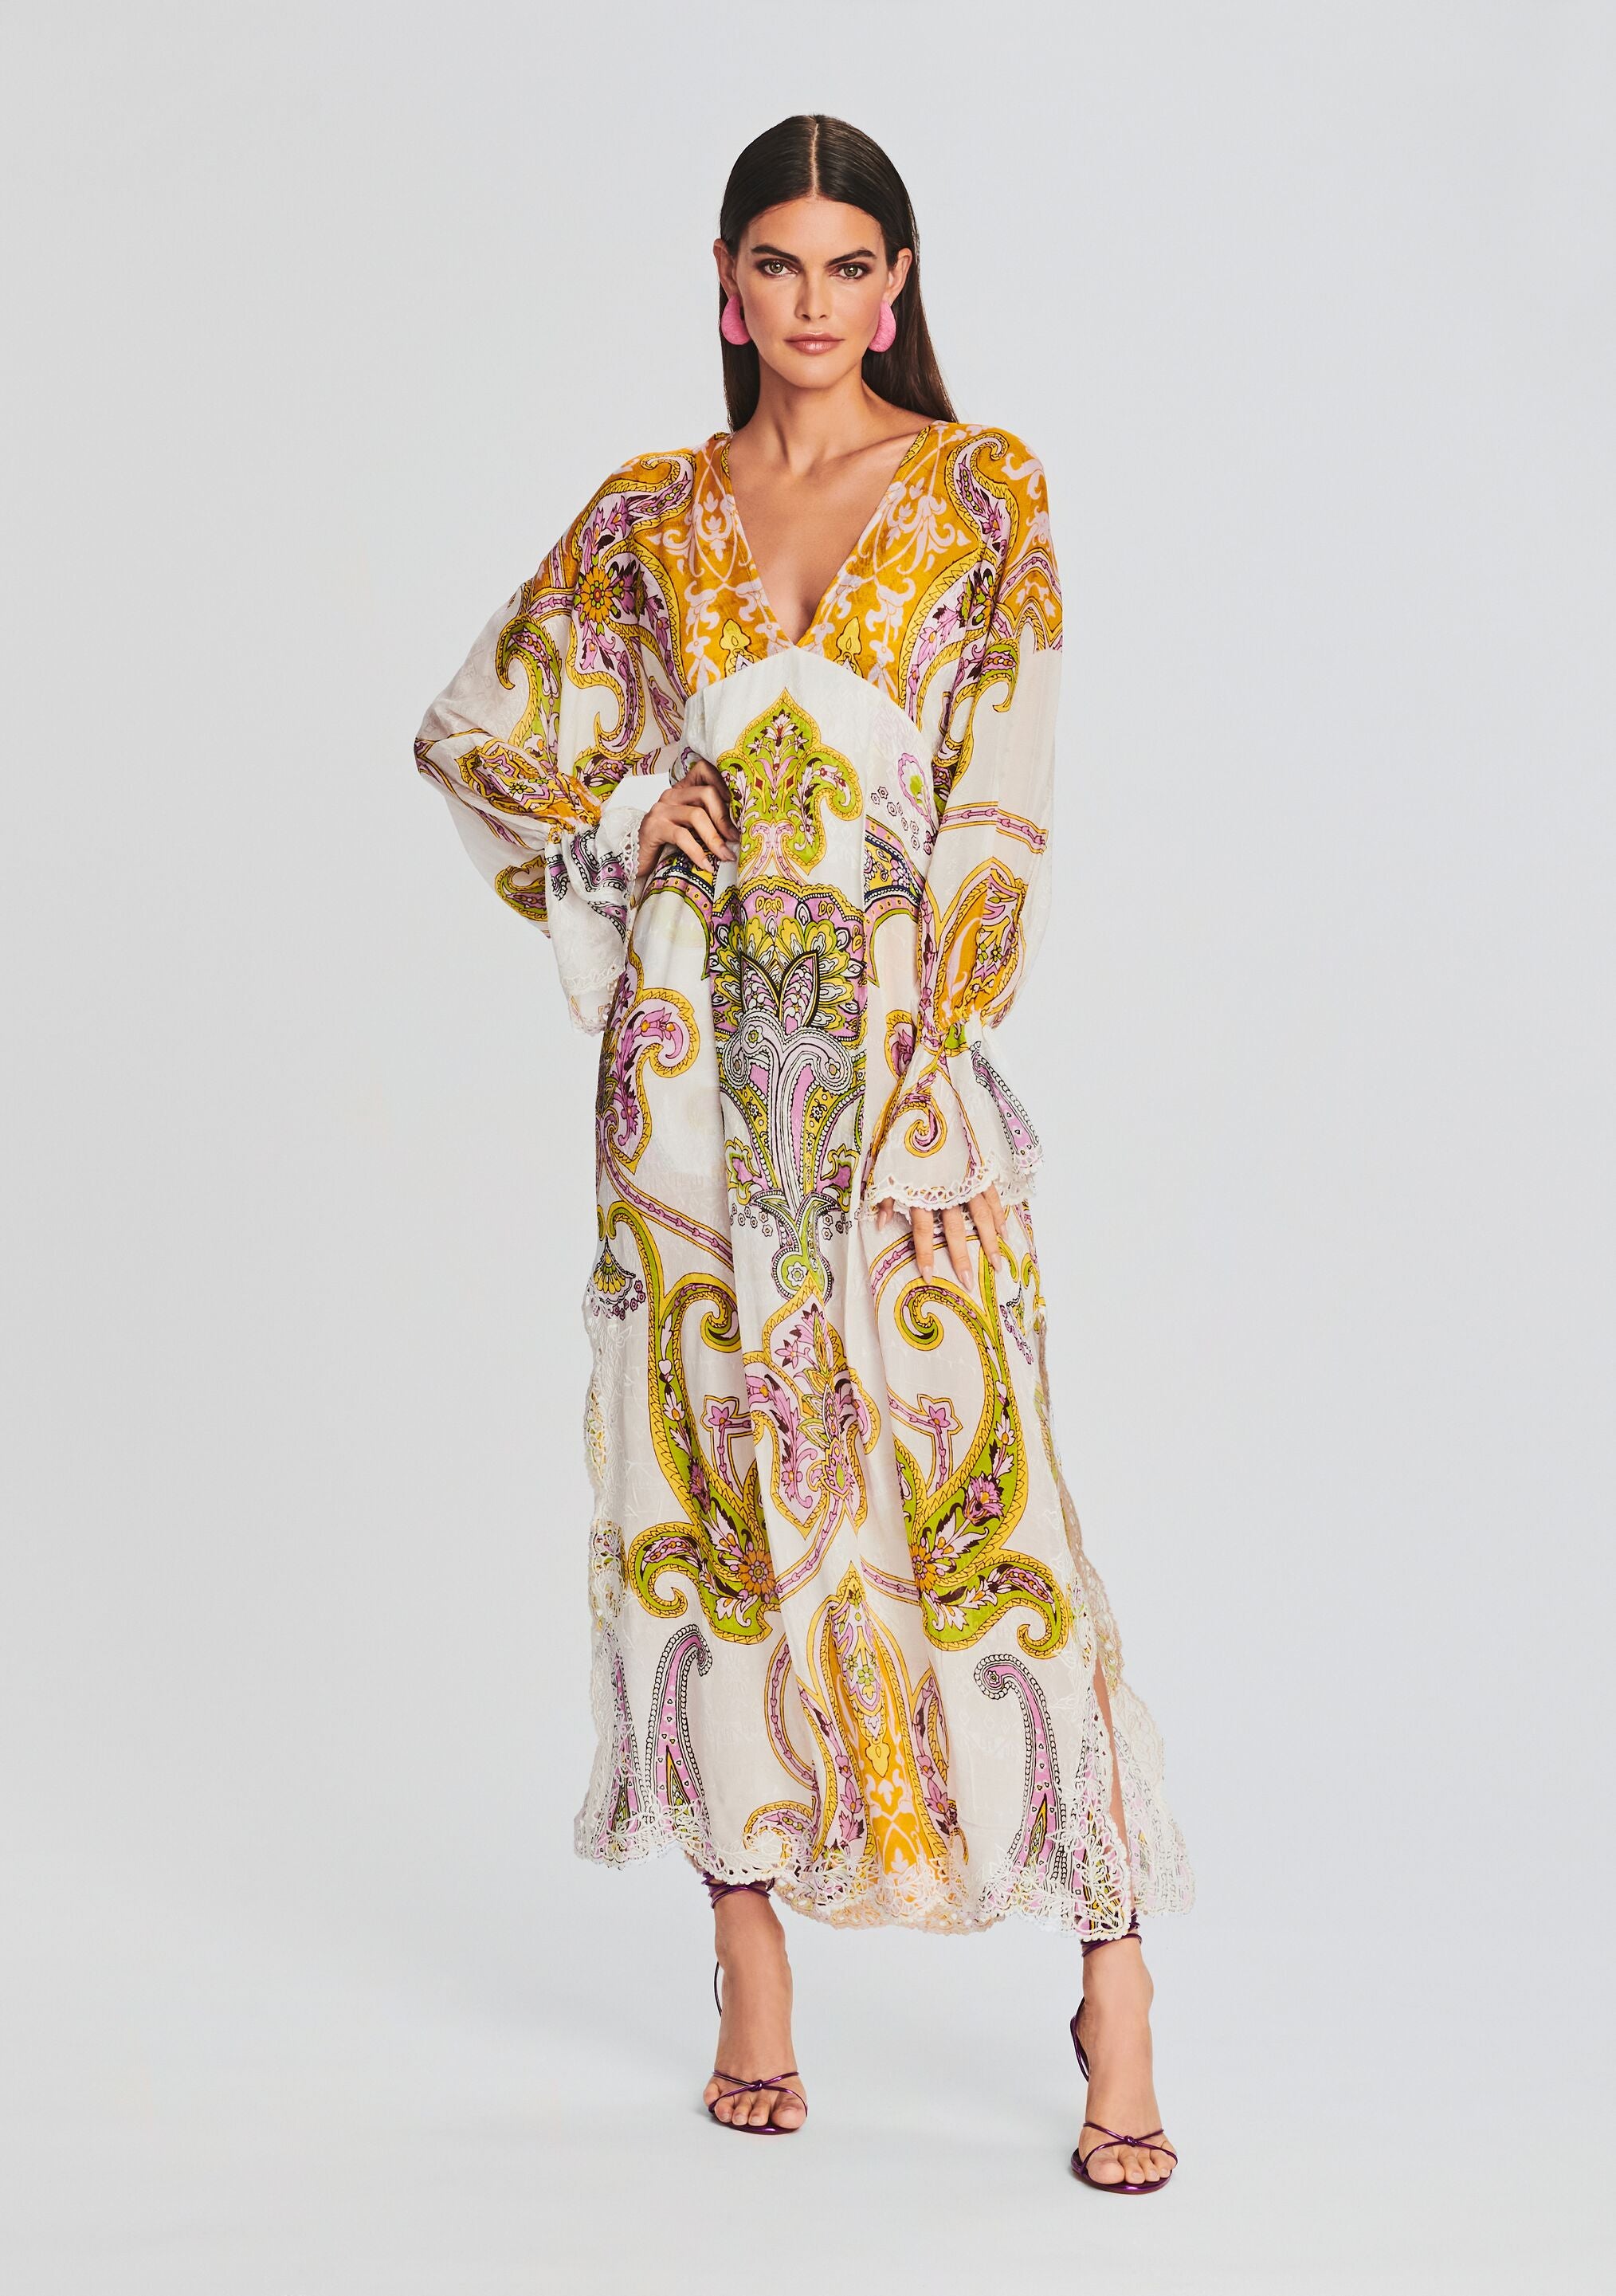 How to style a summer kaftan - Chic at any age